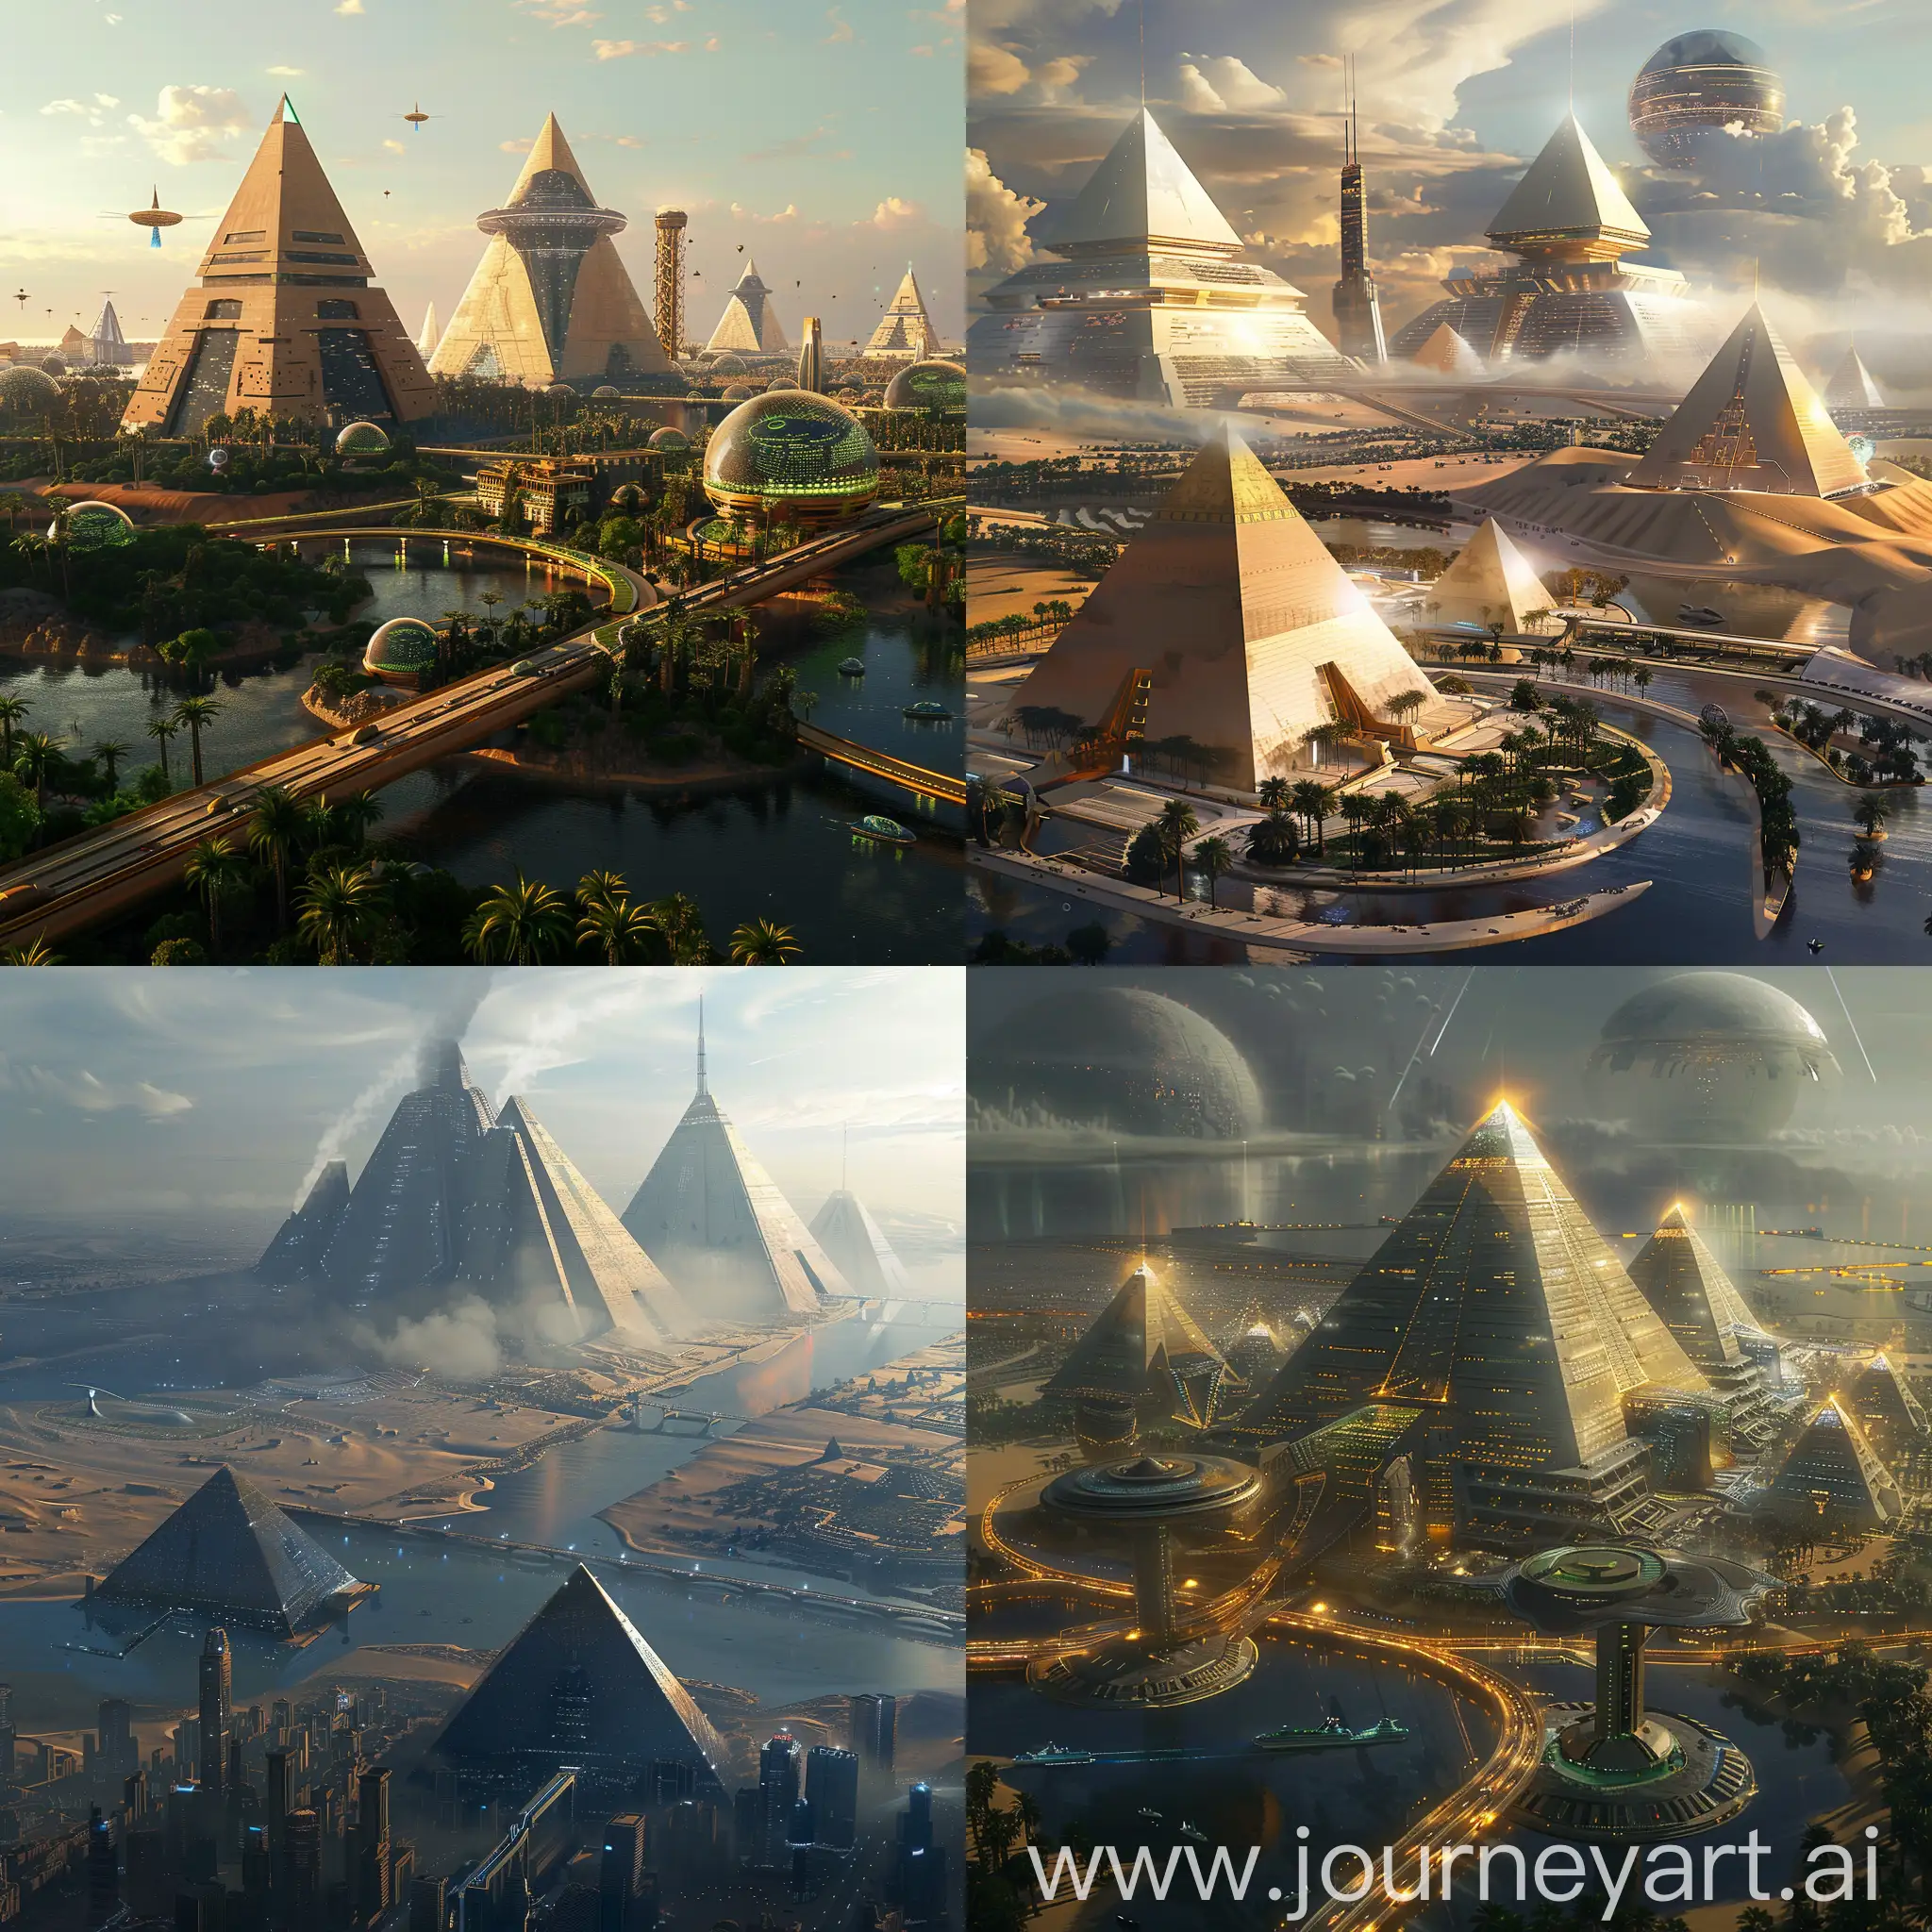 Futuristic-Cairo-with-SolarPowered-Pyramids-and-Hovering-Markets